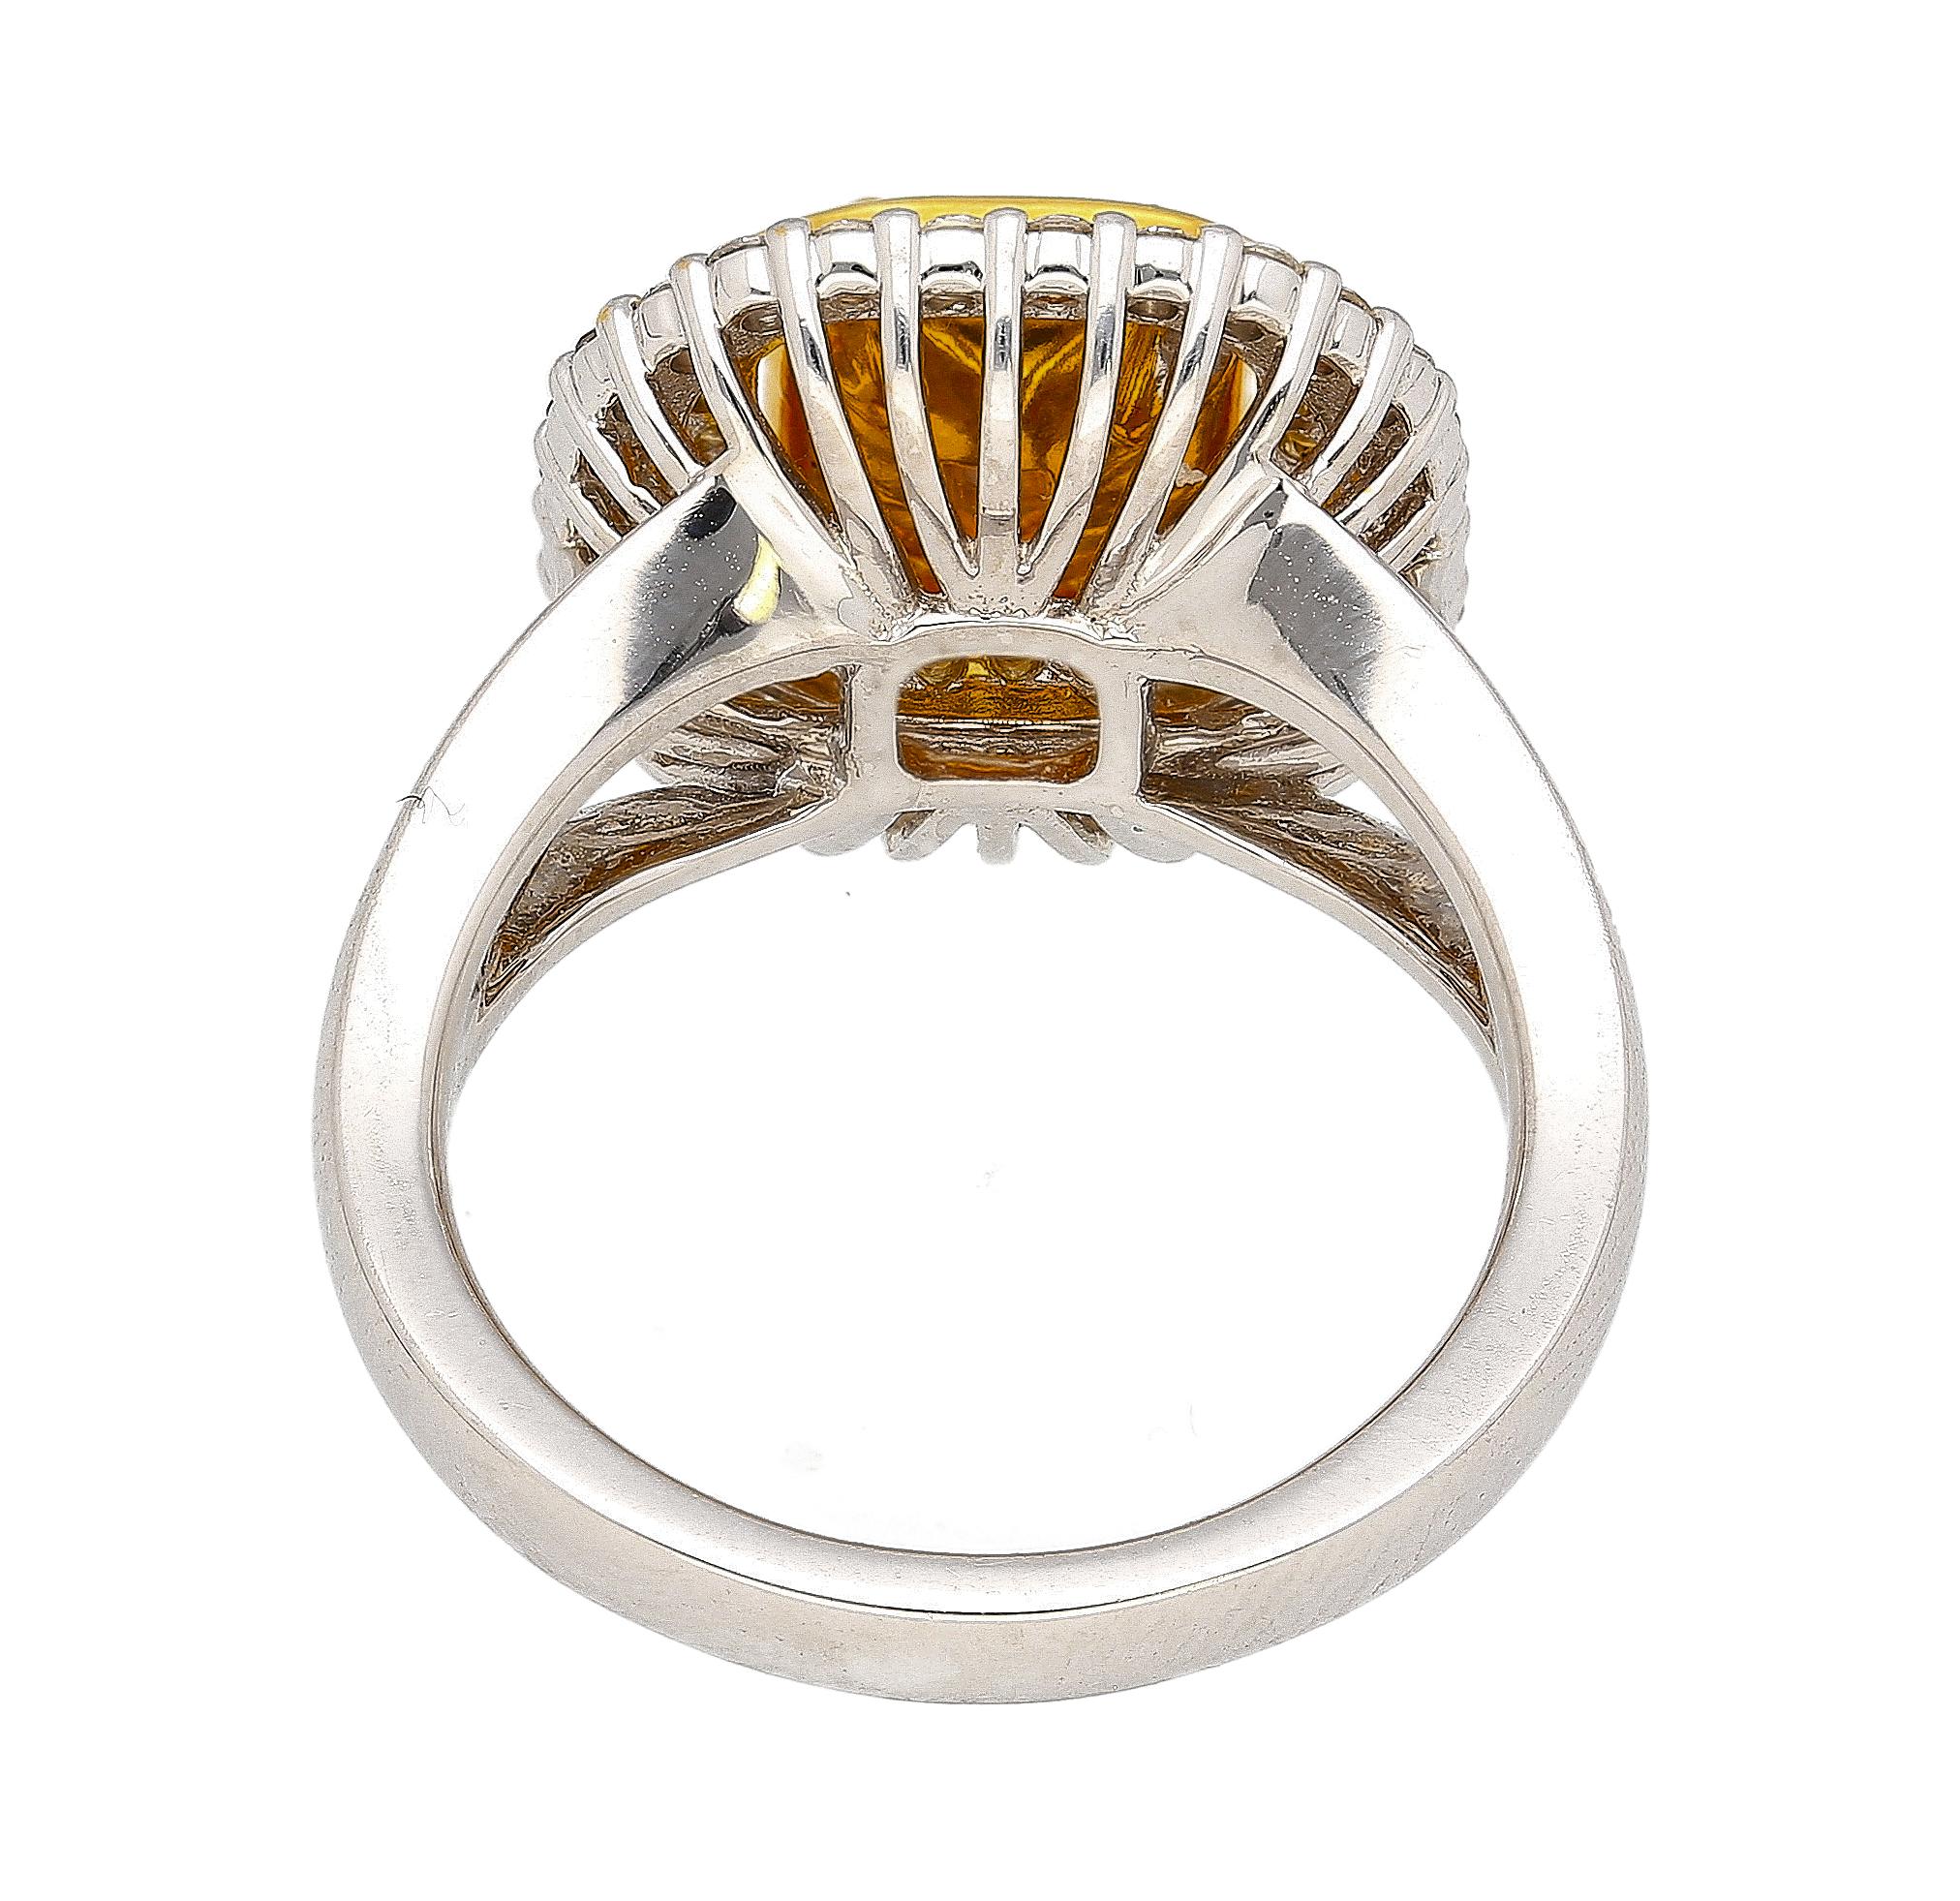 GIA Certified diamond ring. Crafted in two-toned 18K yellow and white gold, this ring boasts a GIA Certified 2.22 carat Fancy Light Diamond center stone with VS1 clarity and even color distribution. Detailed with 28, two-toned - yellow and white -